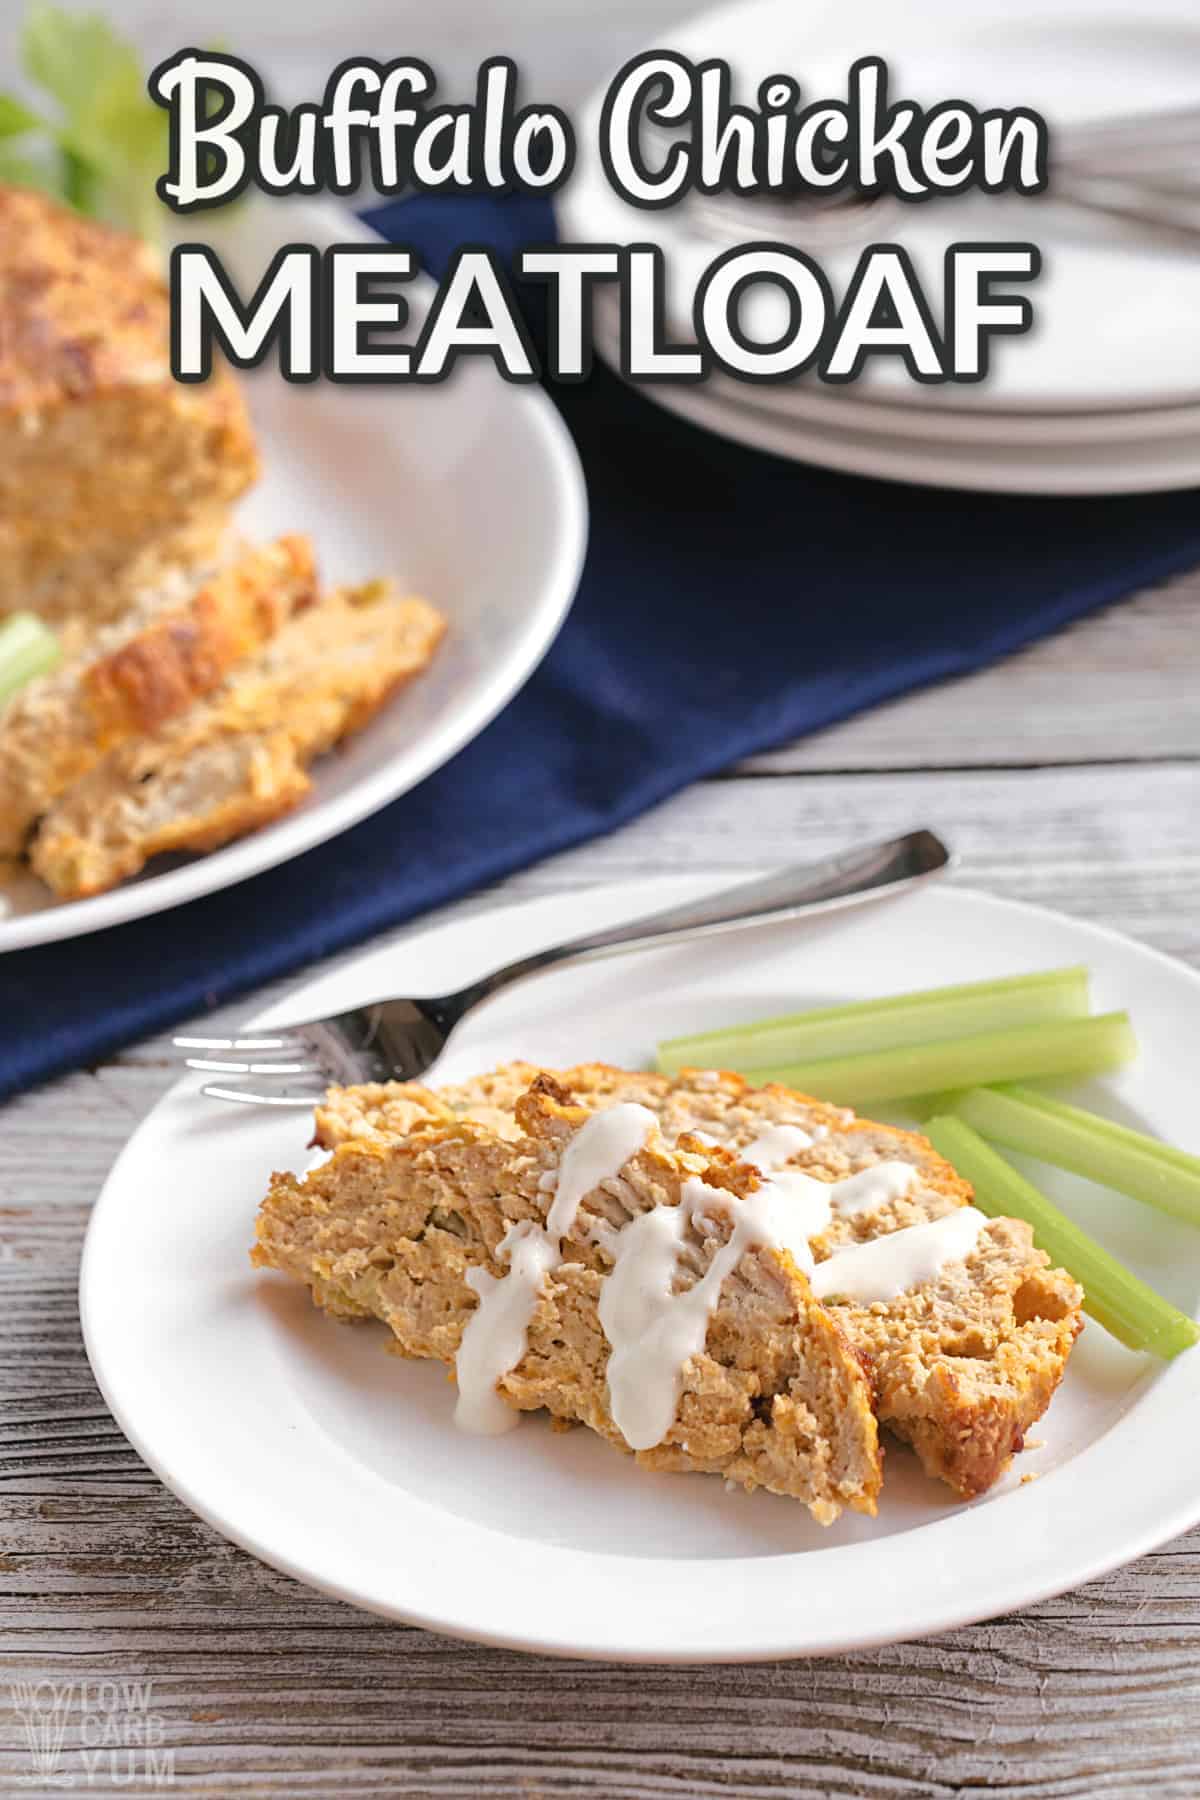 buffalo chicken meatloaf with text overlay.